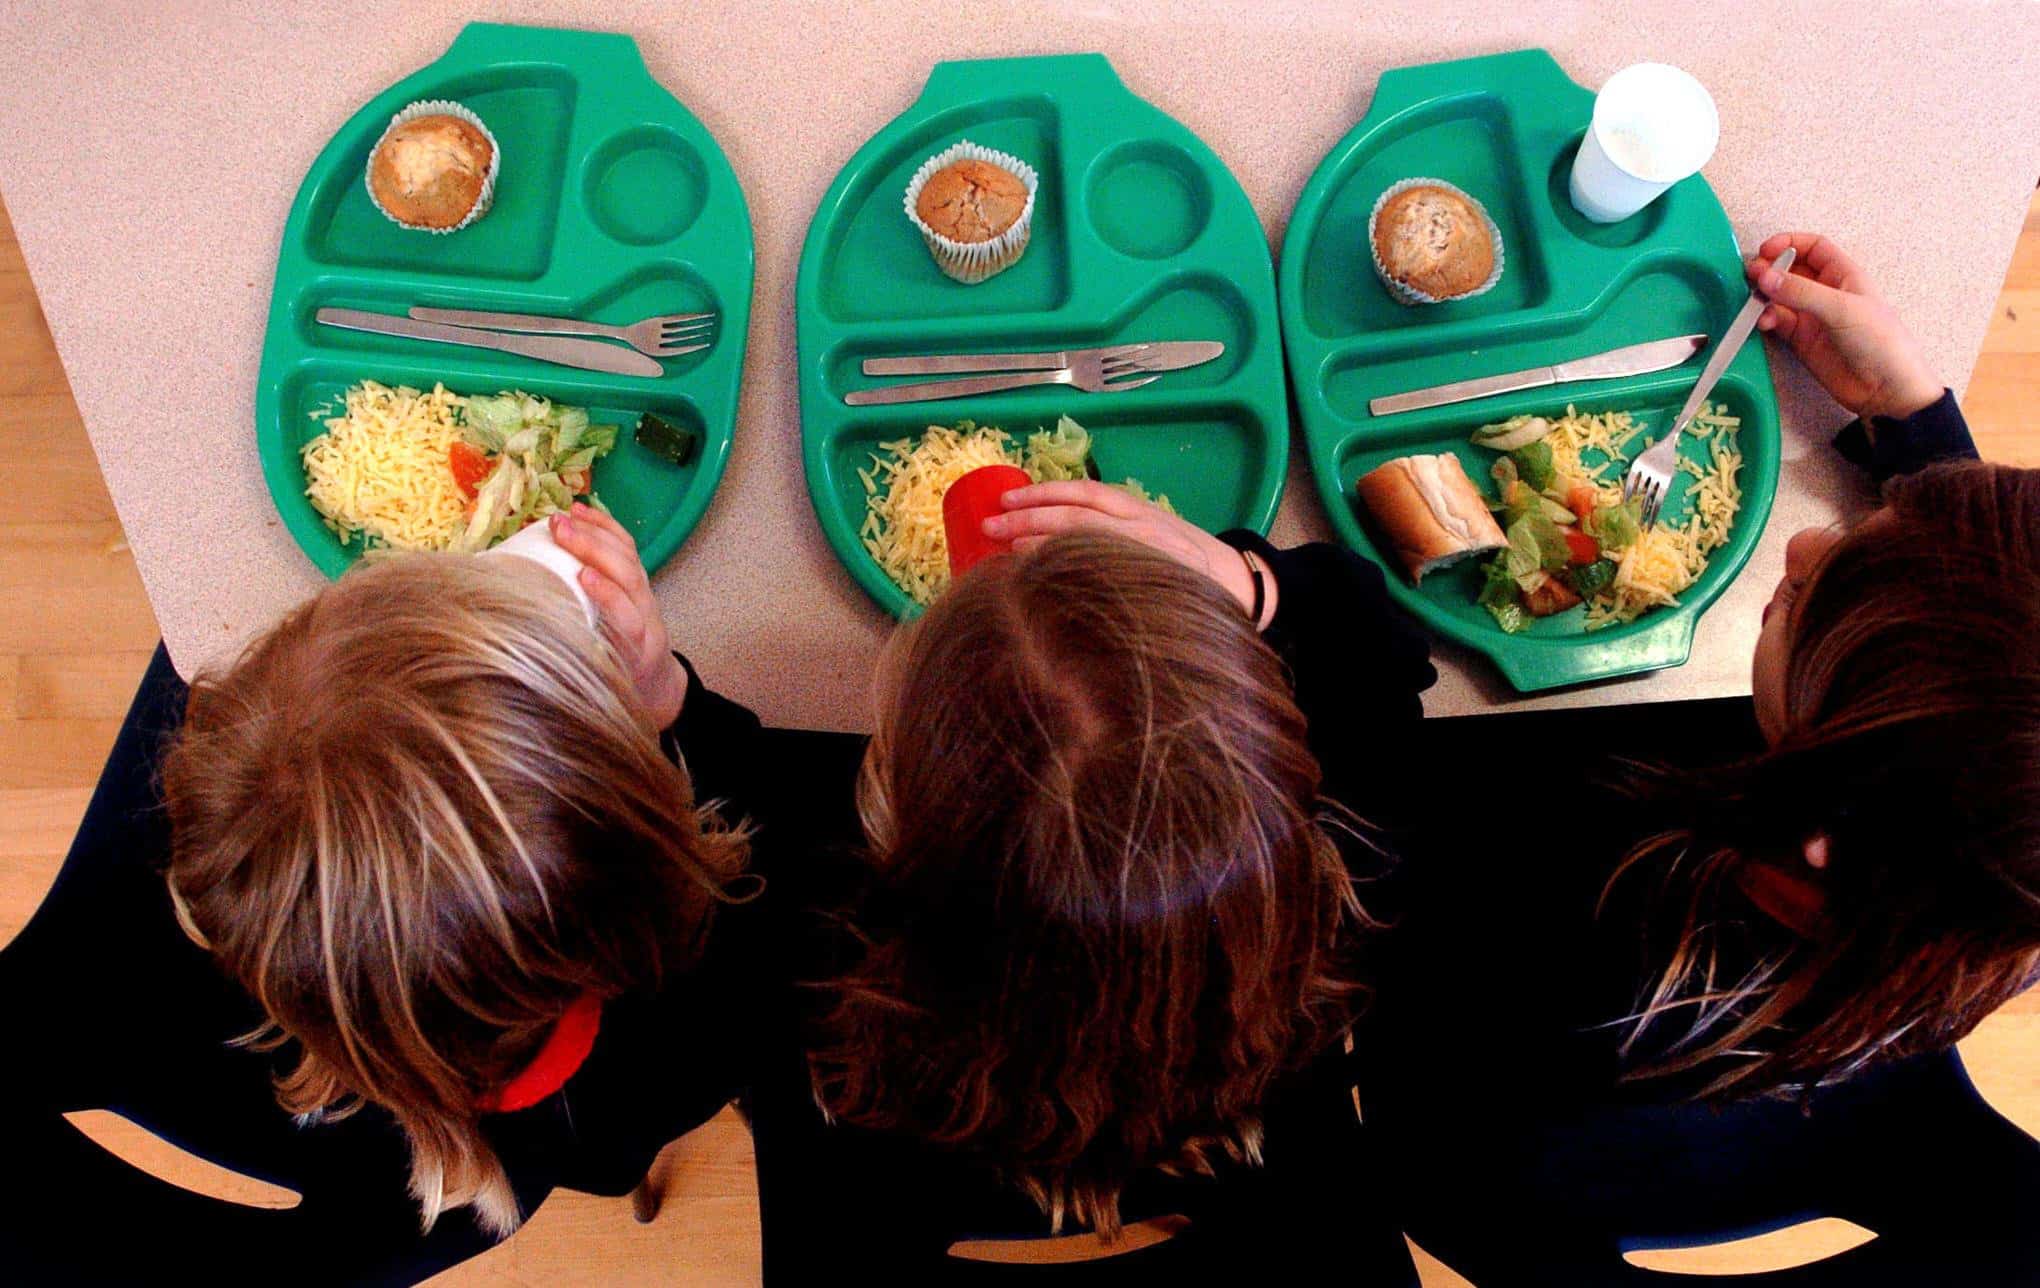 Watch: Dinner lady says she cries as she has to deny children school lunch